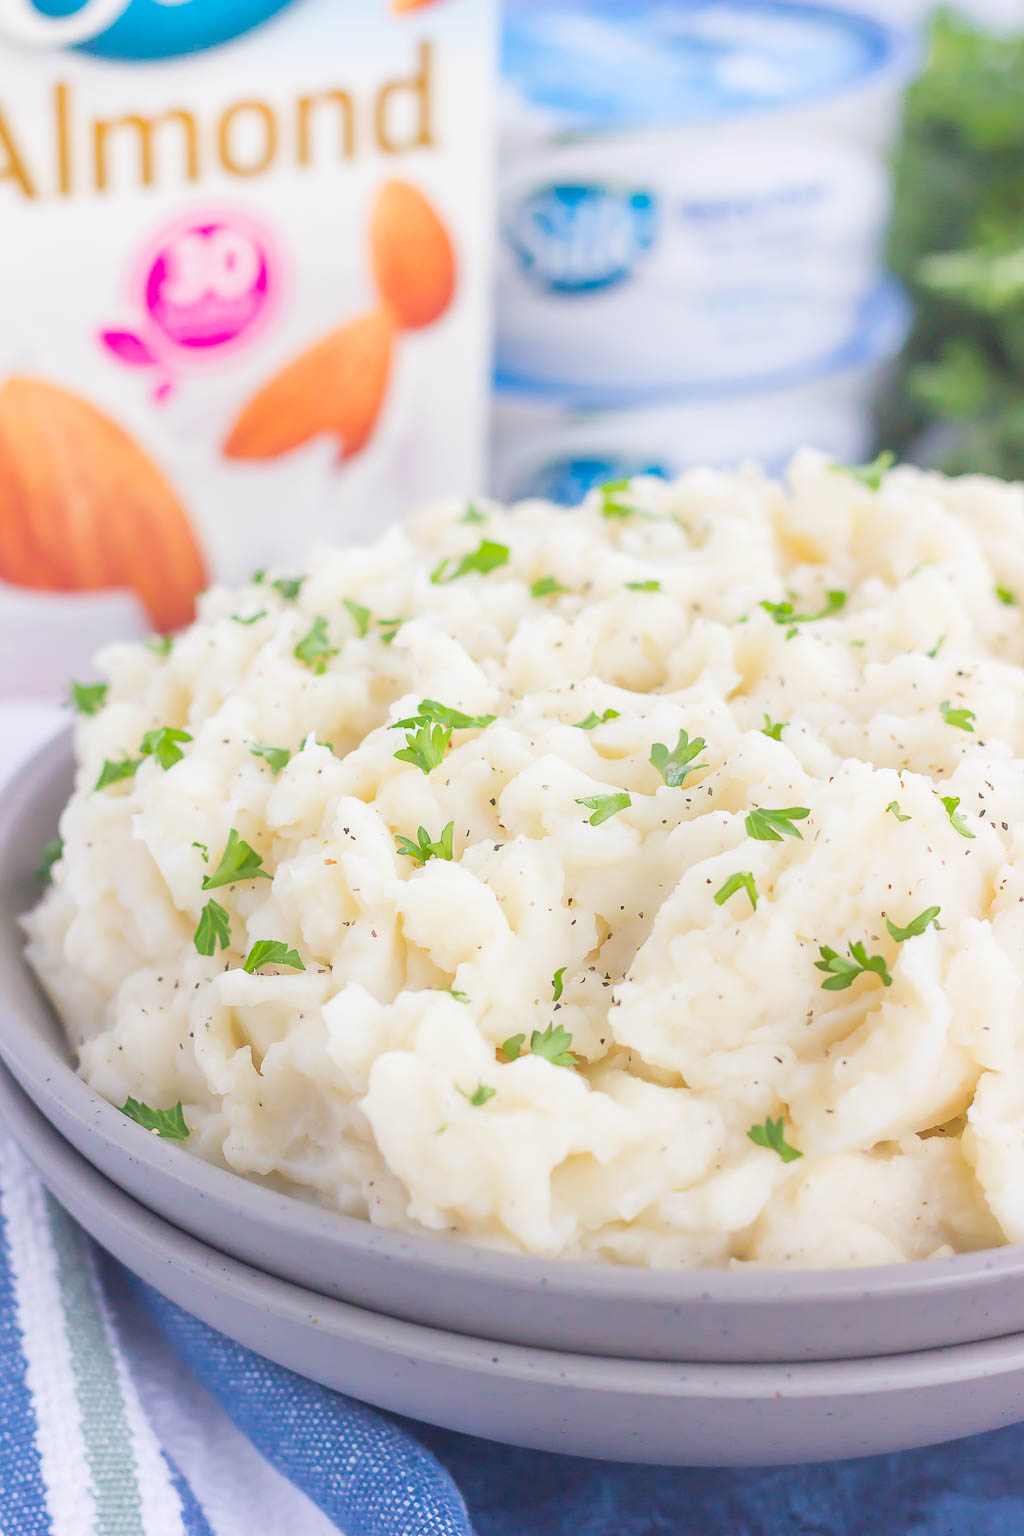 These Dairy-Free Garlic Mashed Potatoes are creamy, loaded with flavor, and made with no cream or butter. Tender potatoes are whipped to perfection and then sprinkled with seasonings and ready to serve. Easy to make and with simple ingredients, you'll never miss the dairy in this tasty side dish!